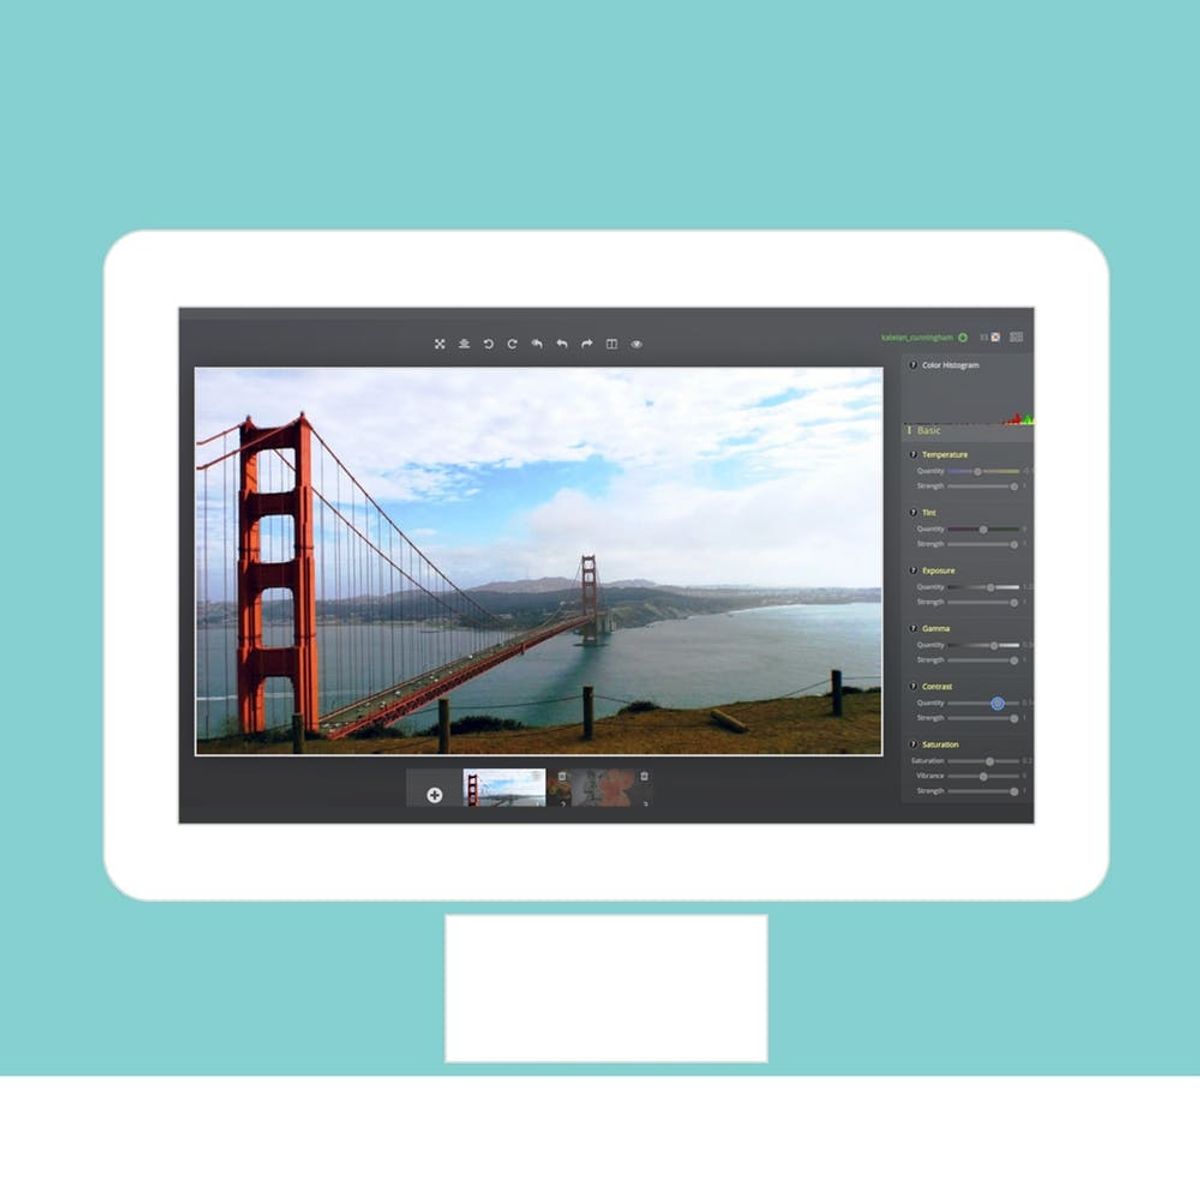 Who Needs Photoshop? Edit Pics Online for FREE With Polarr